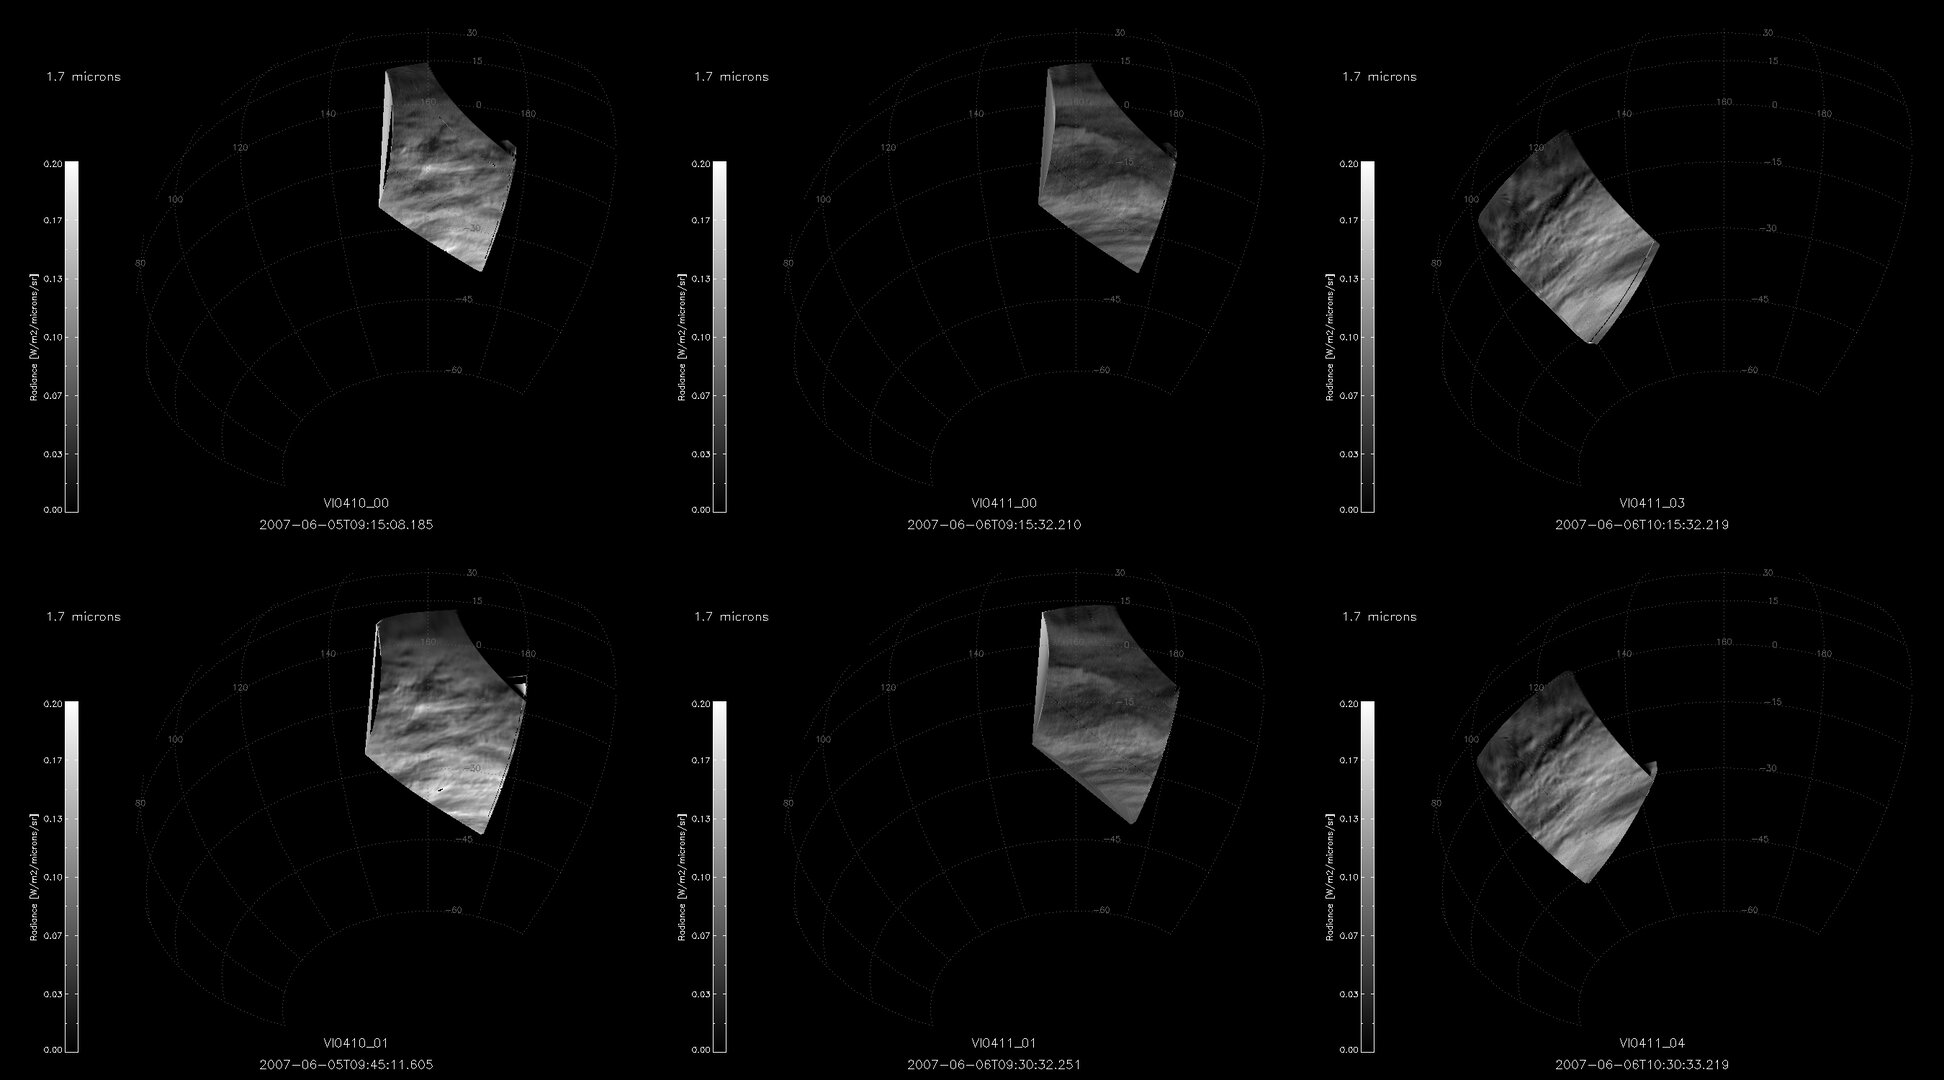 VIRTIS images of the clouds that MESSENGER flew over